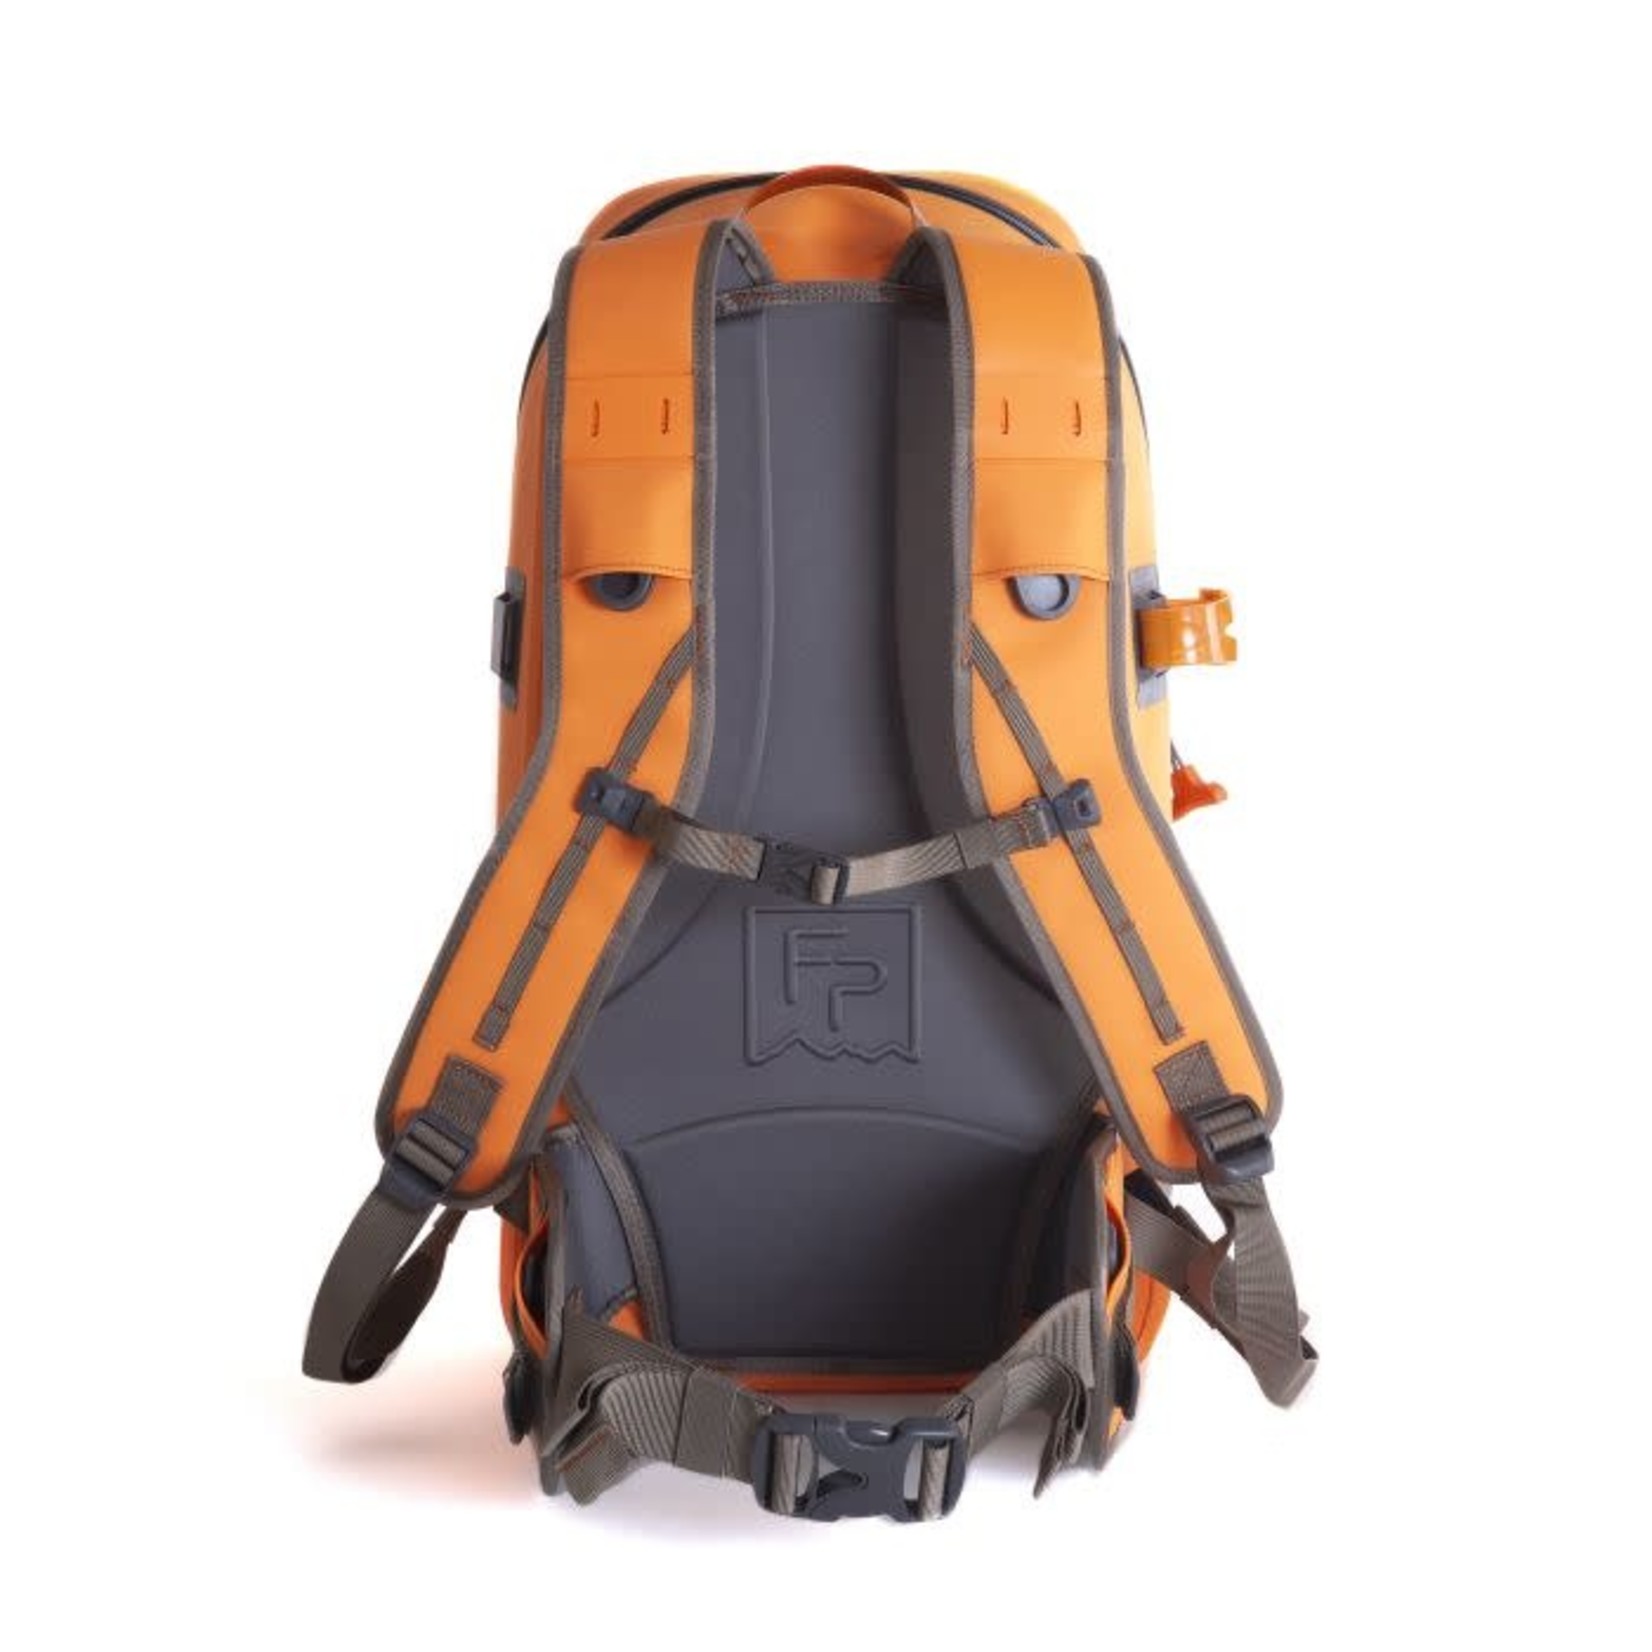 Fishpond Thunderhead Submersible Backpack - ECO -